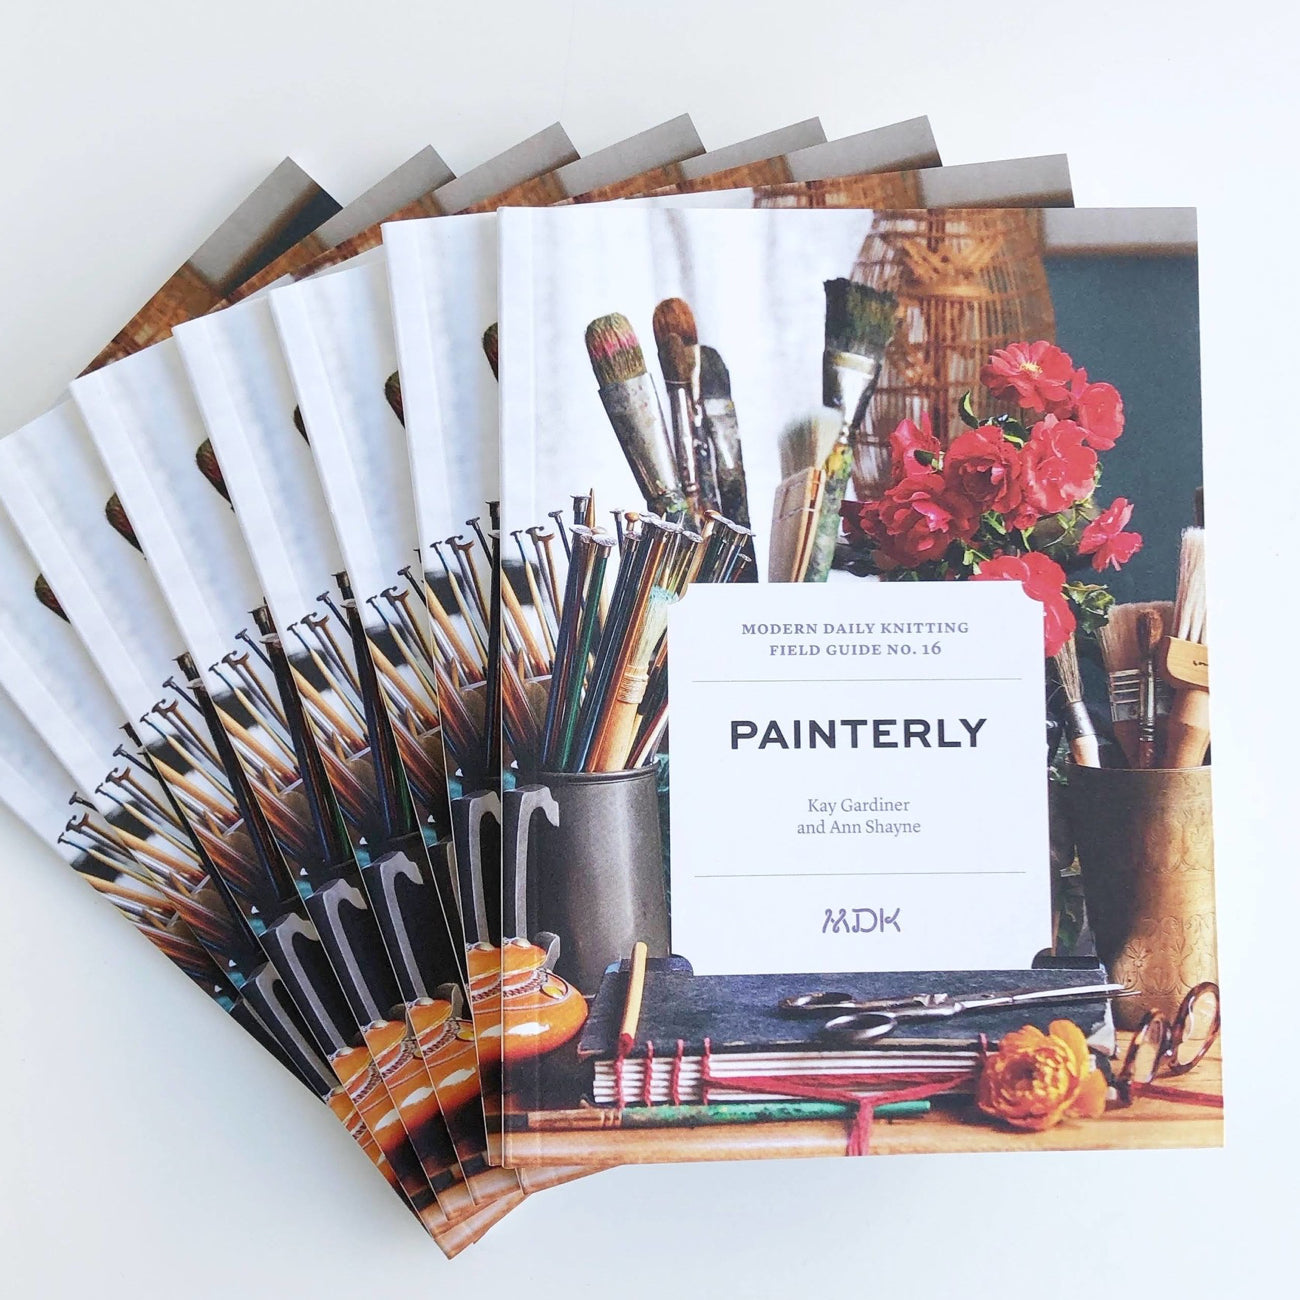 Modern Daily Knitting Field Guide No. 16 - Painterly